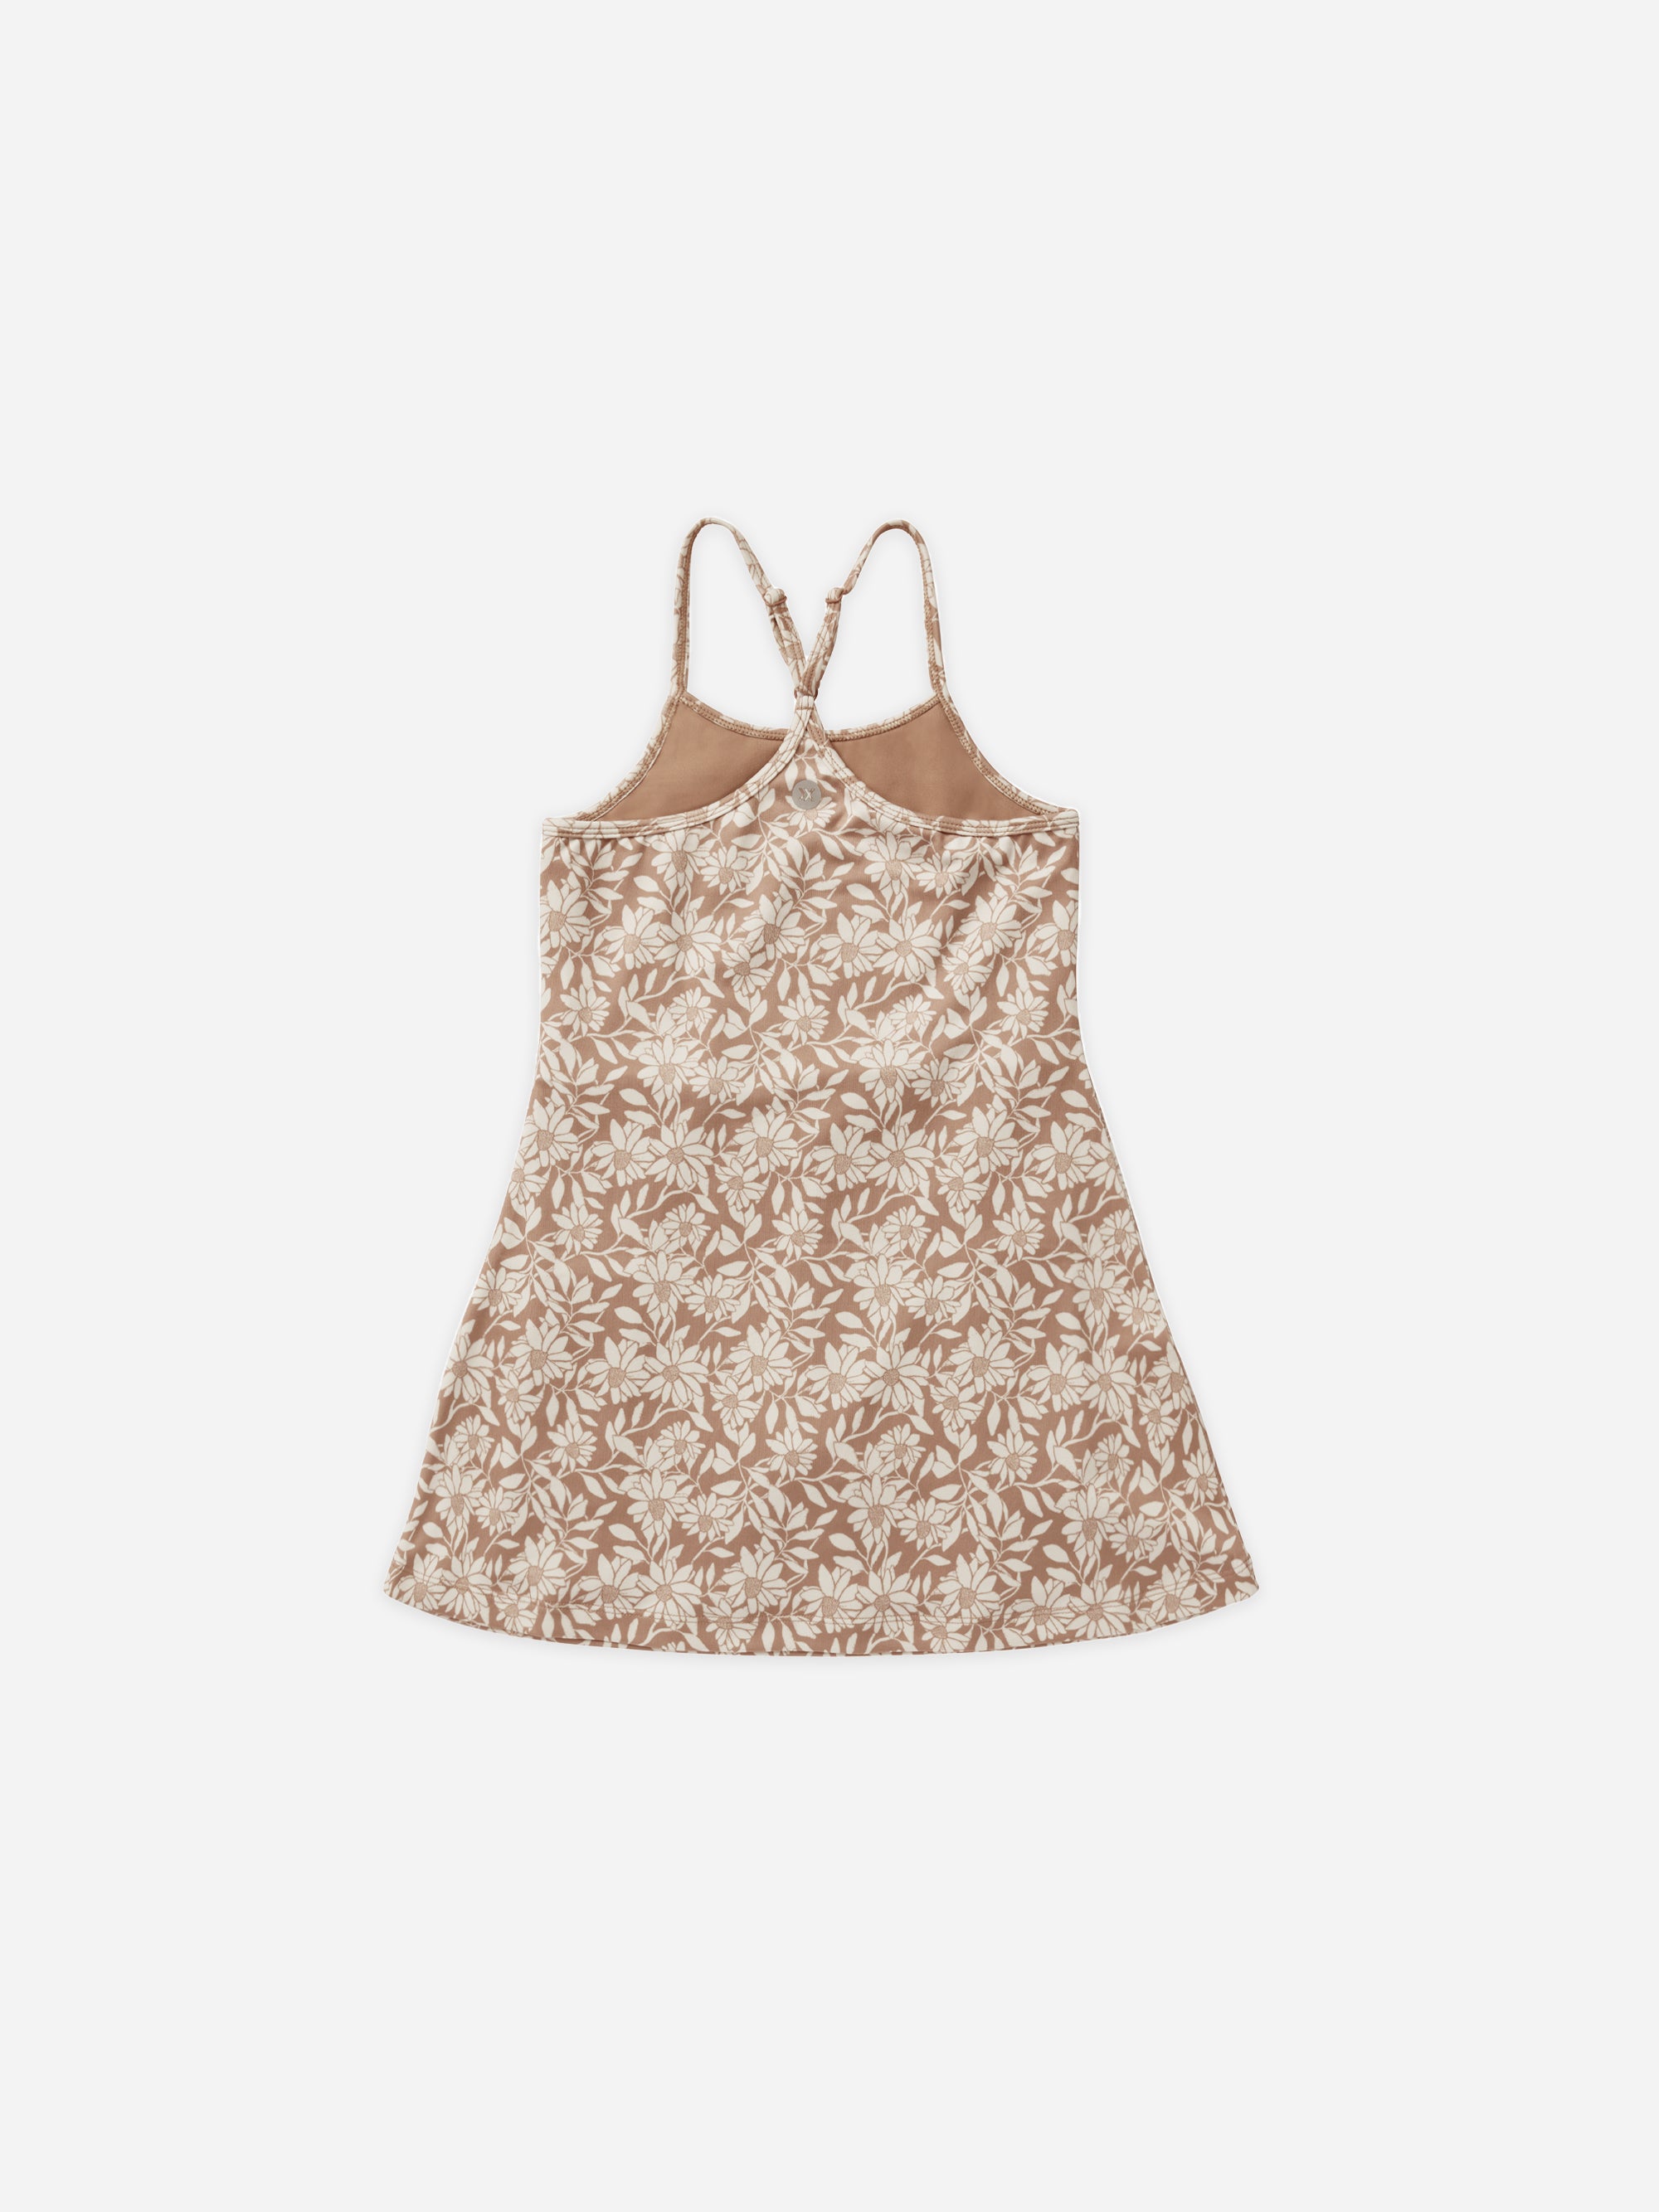 Loma Dress || Plumeria - Rylee + Cru | Kids Clothes | Trendy Baby Clothes | Modern Infant Outfits |